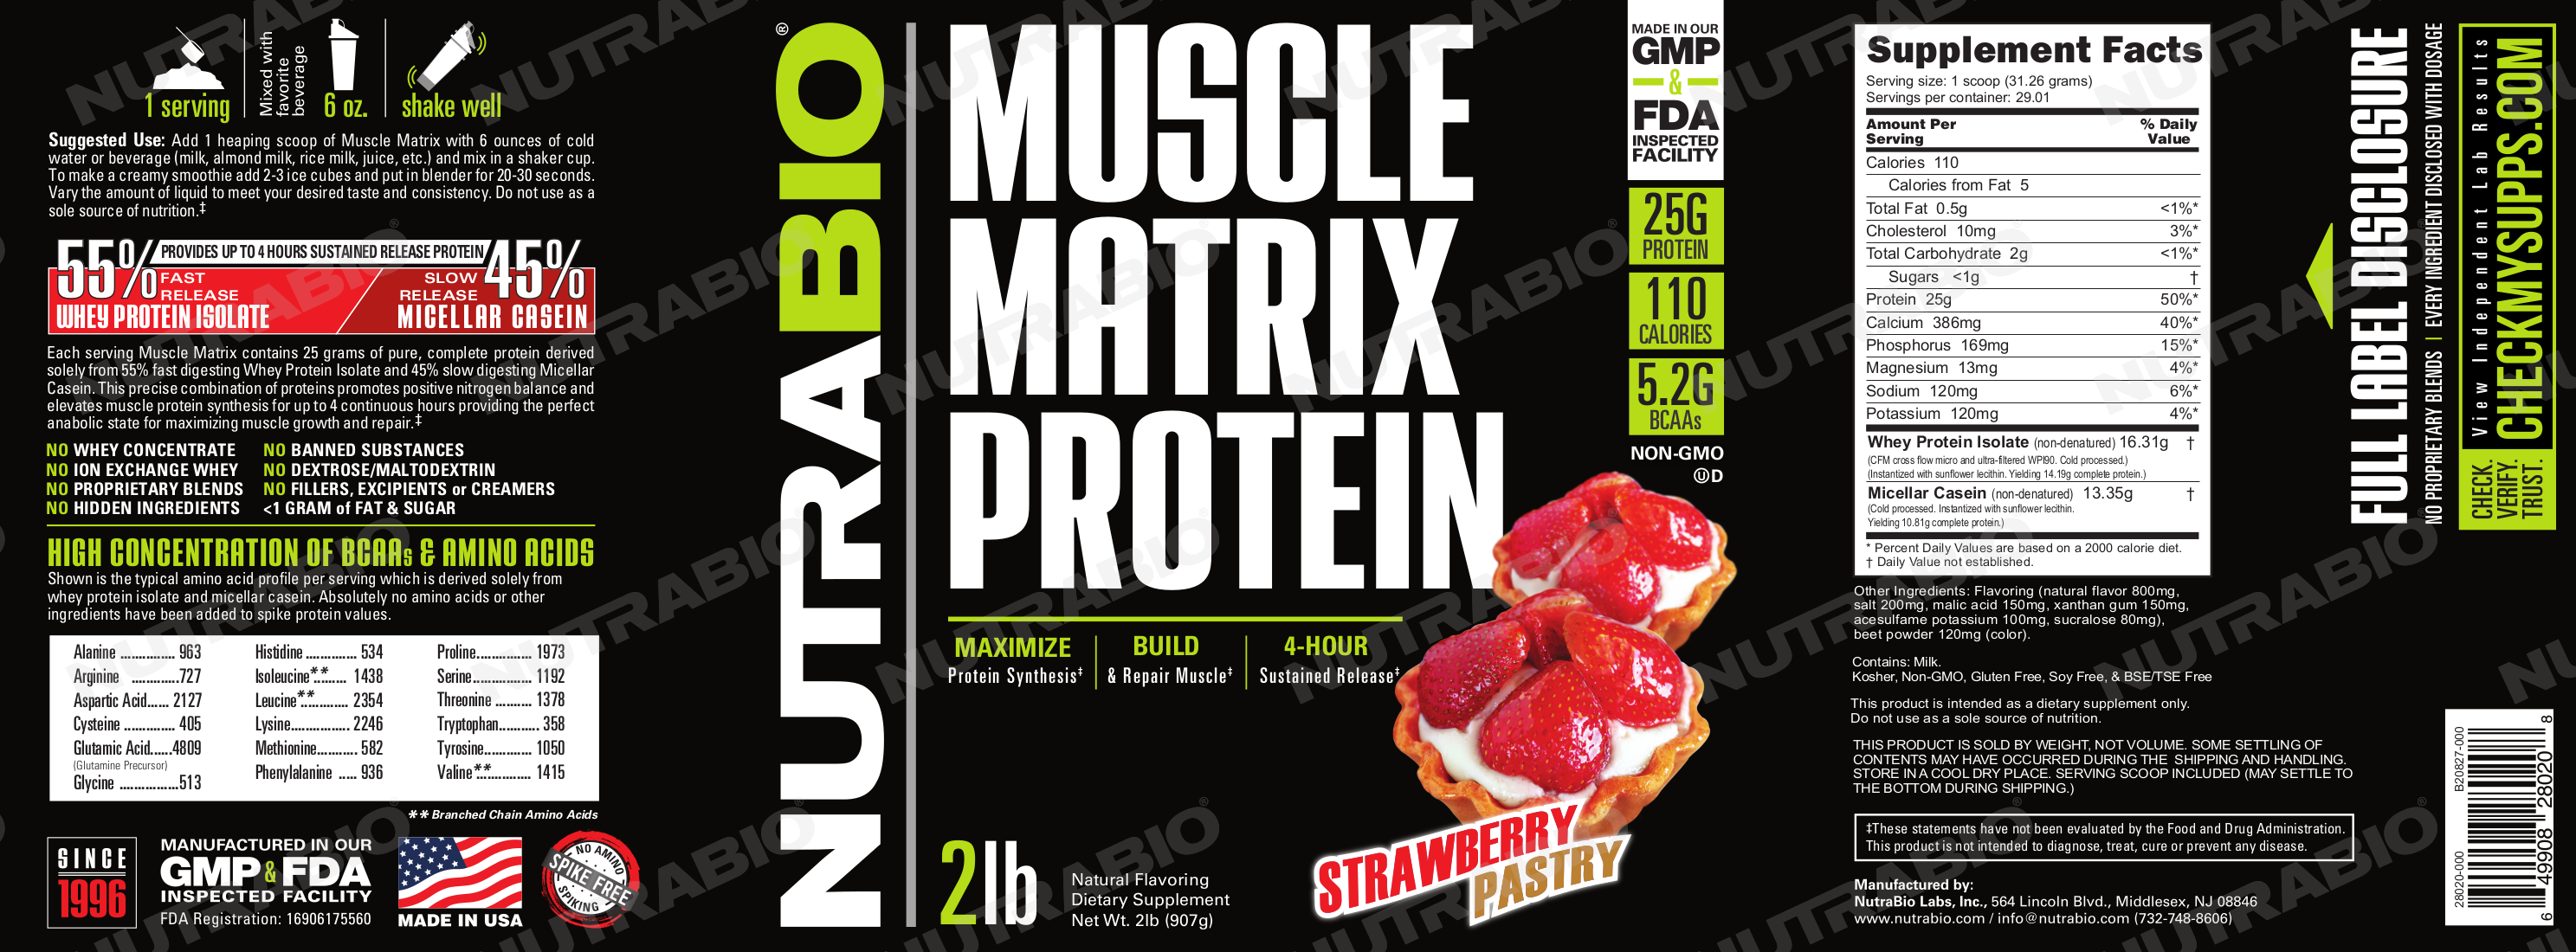 NutraBio Muscle Matrix Strawberry Pastry Label